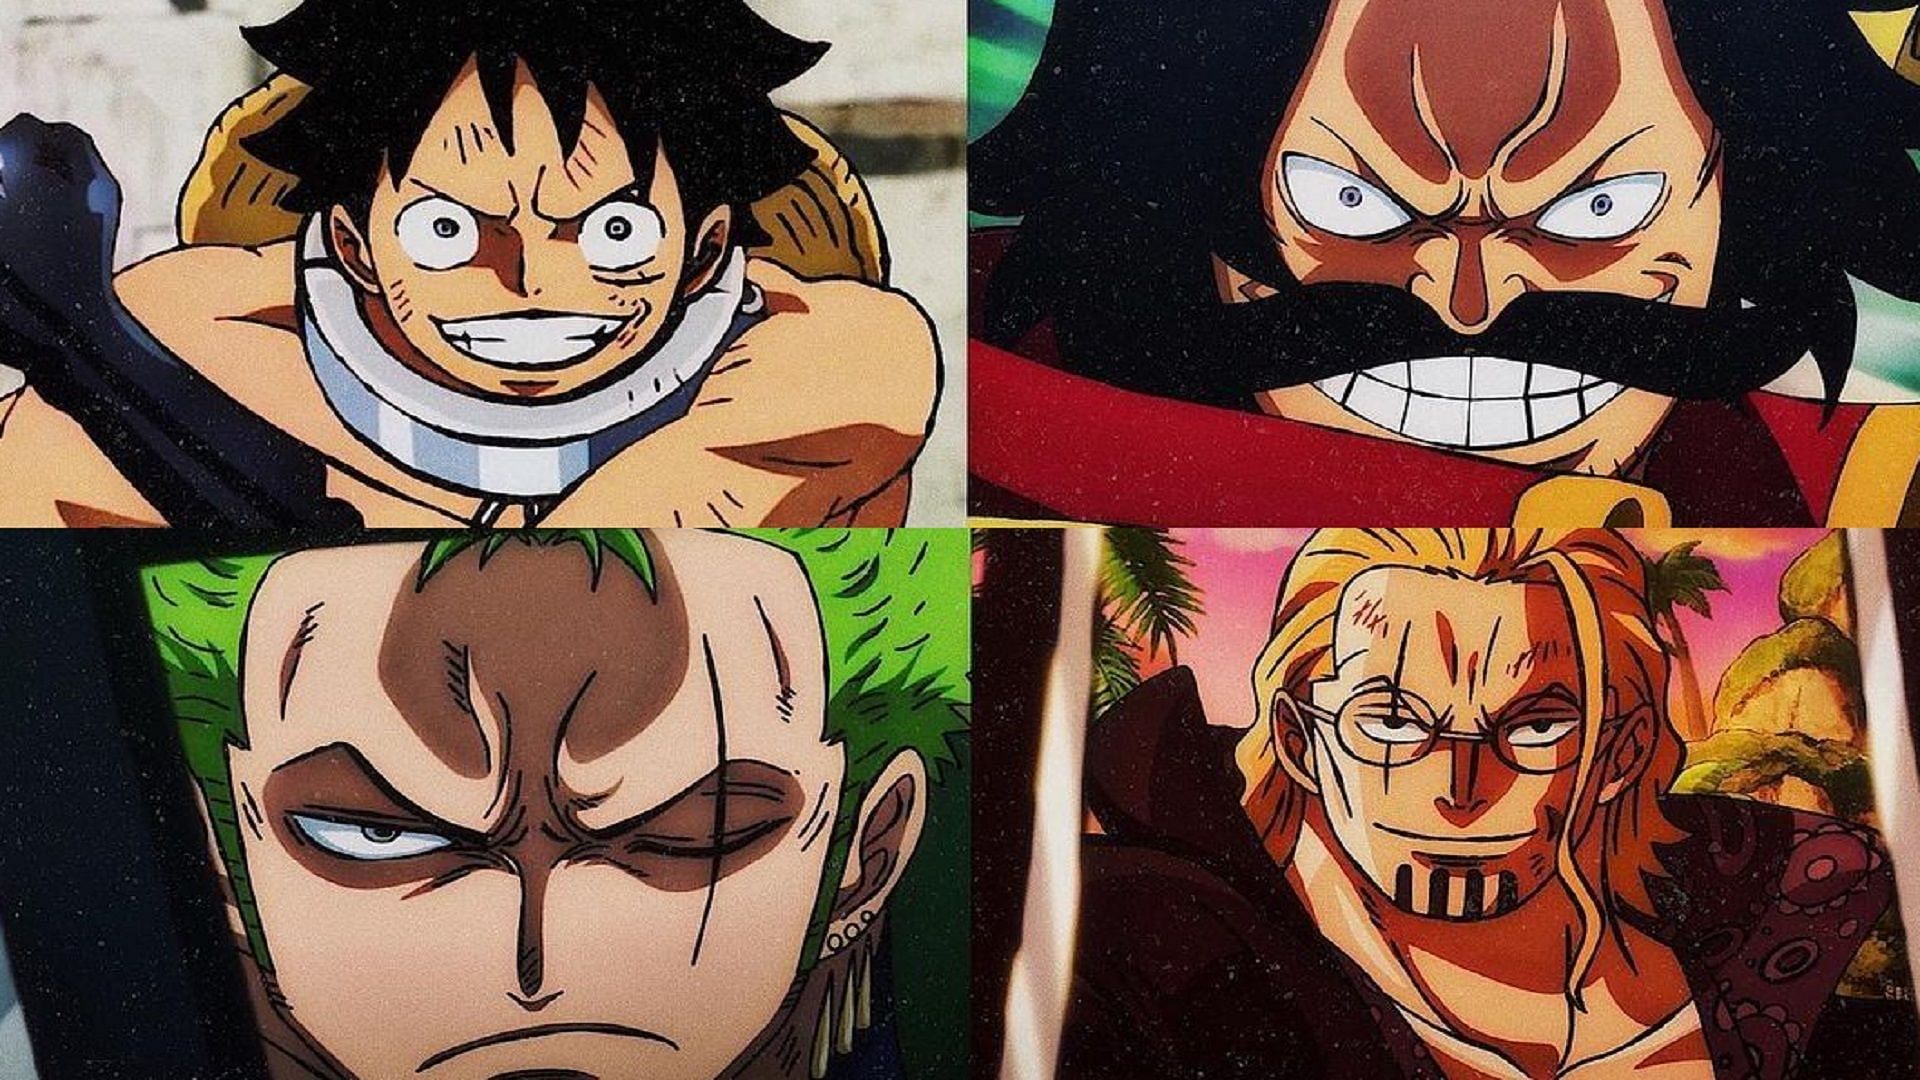 Luffy and Roger, future and former Pirate King, together with Zoro and Rayleigh, their right-hand men (Image via Toei Animation, One Piece)